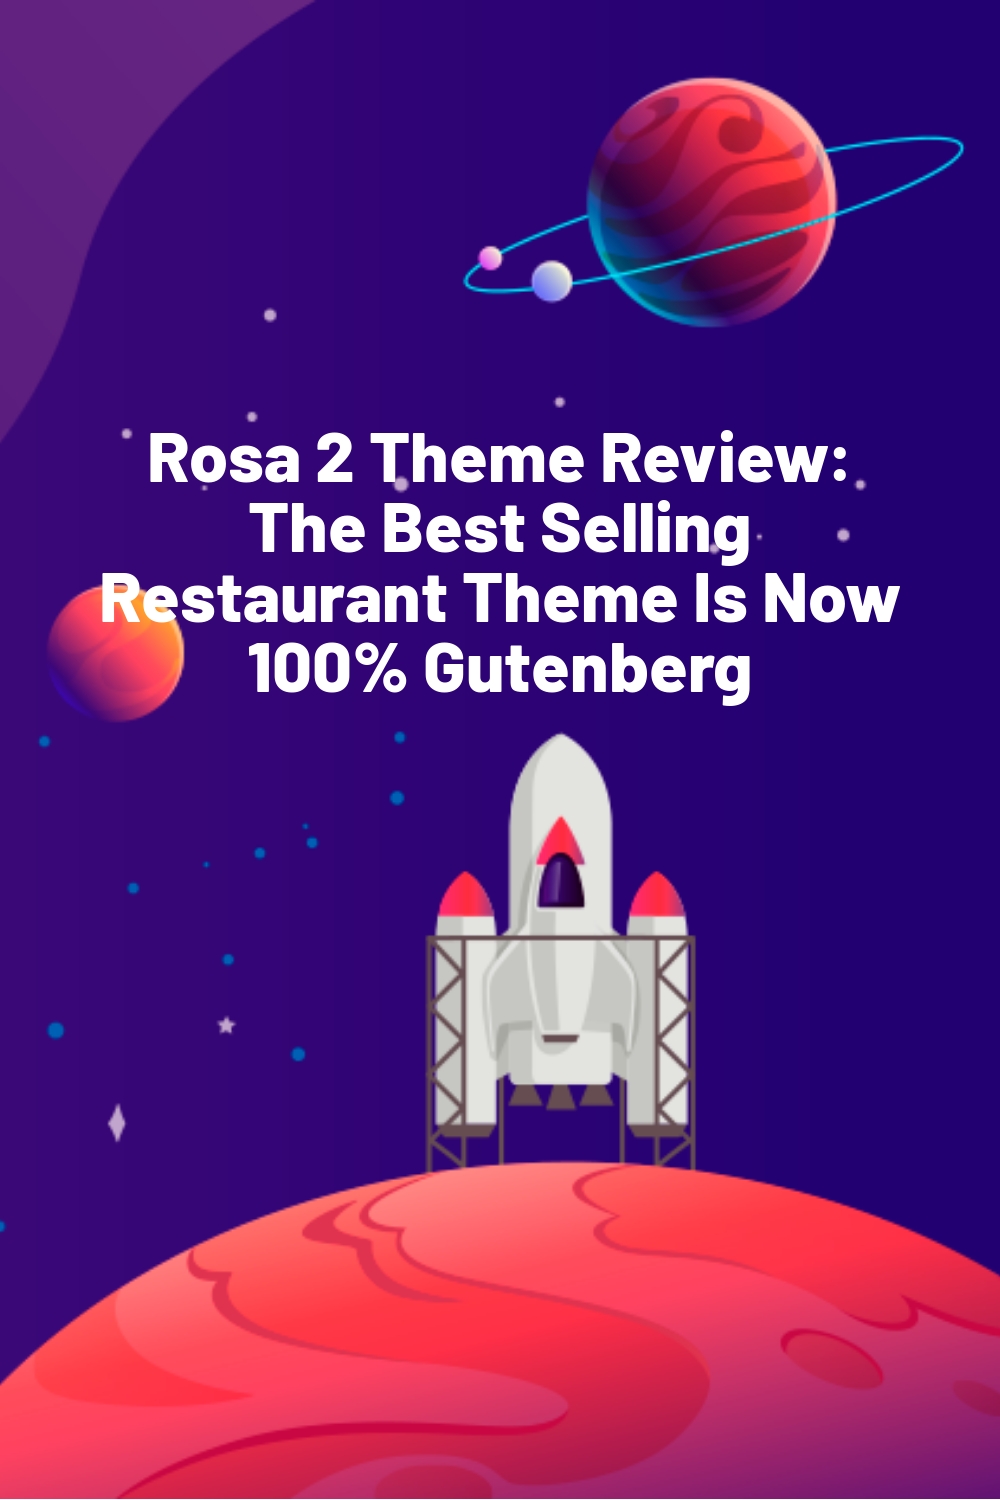 Rosa 2 Theme Review: The Best Selling Restaurant Theme Is Now 100% Gutenberg